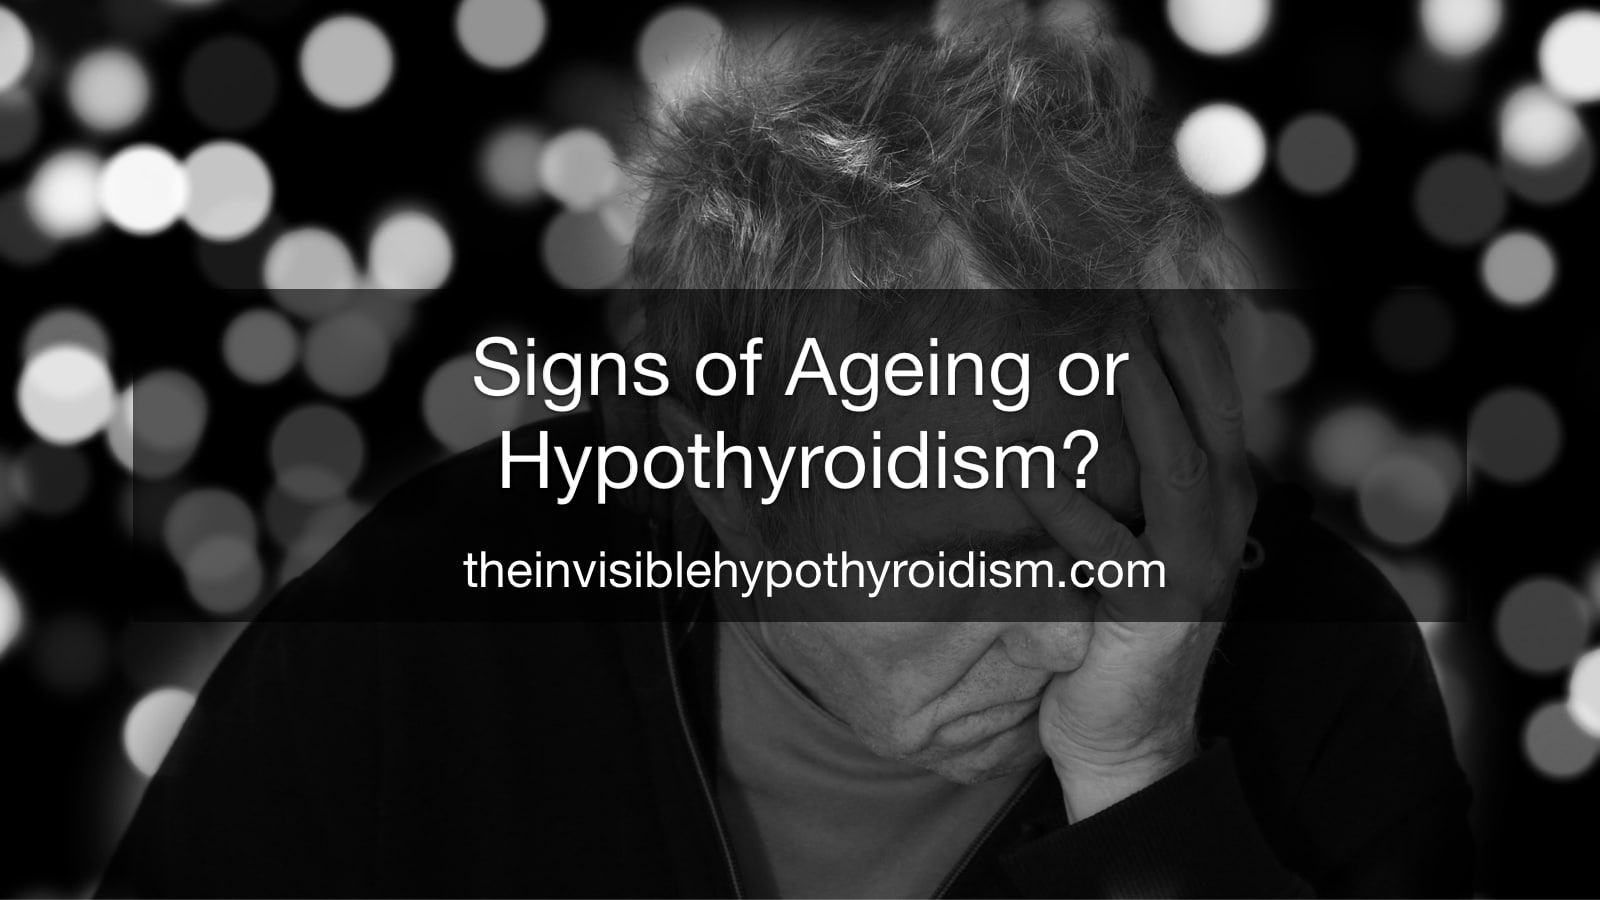 Signs of Ageing or Hypothyroidism?